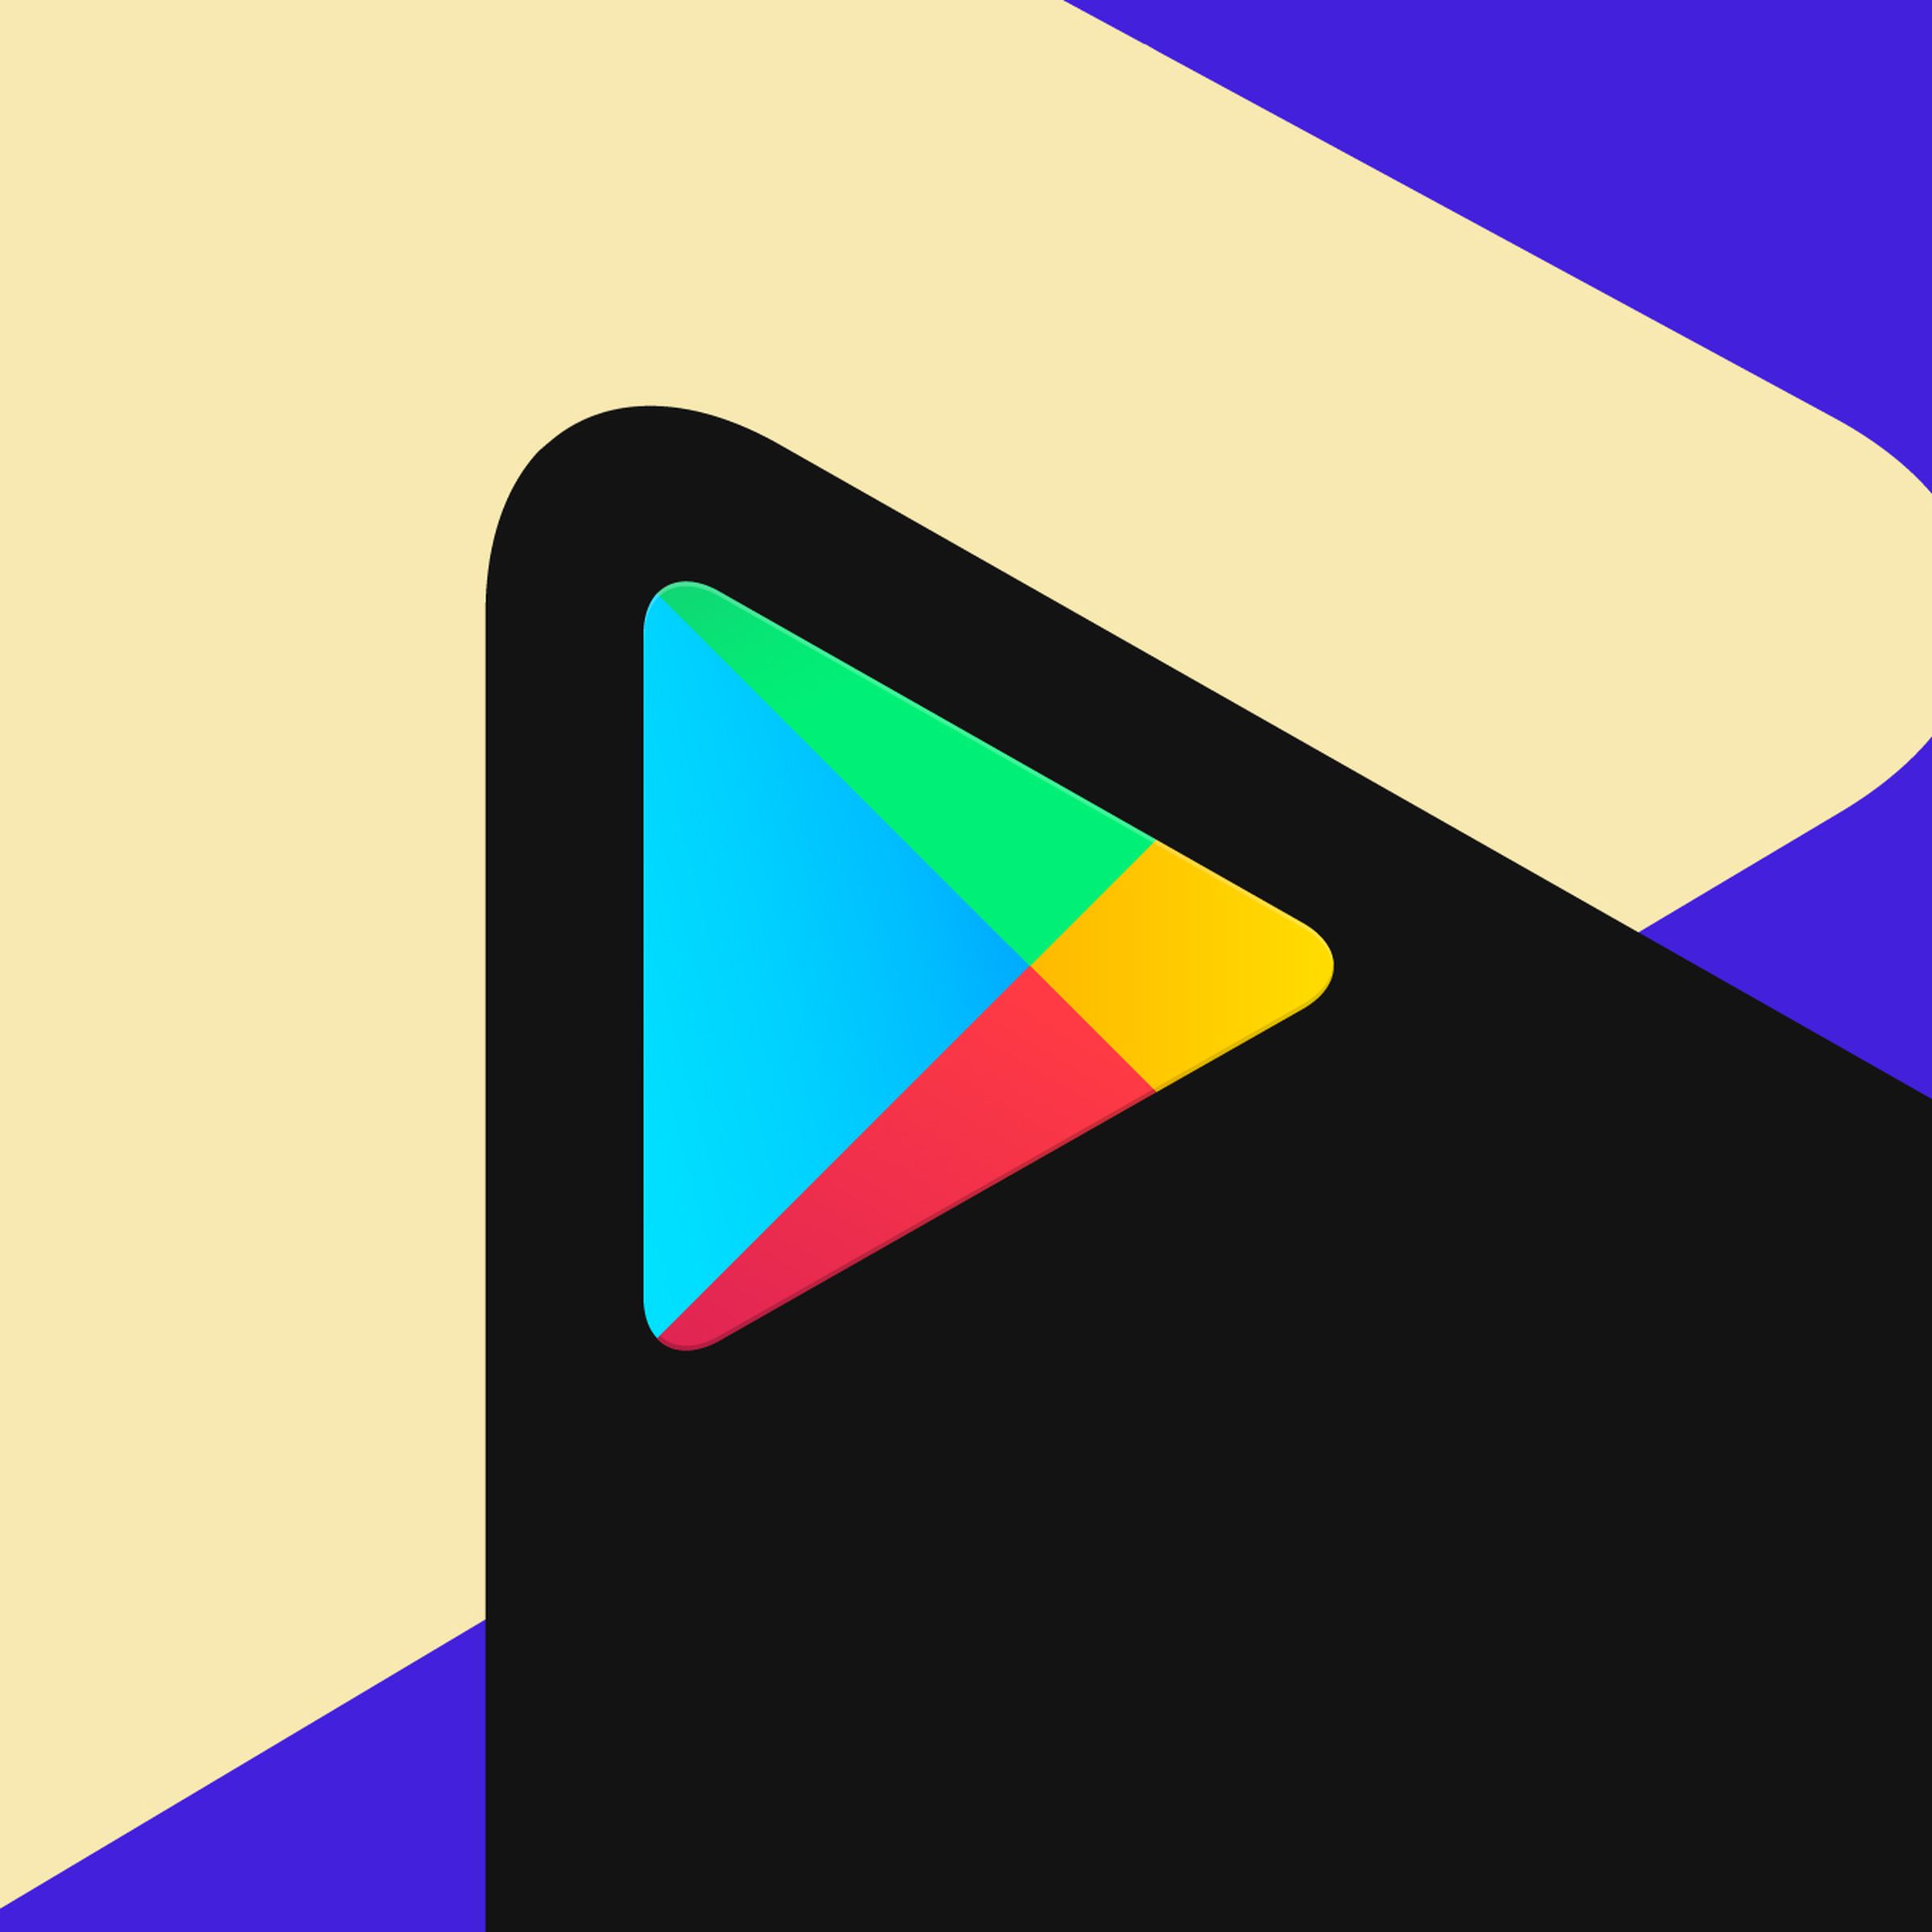 The Google Play logo against a colorful background.